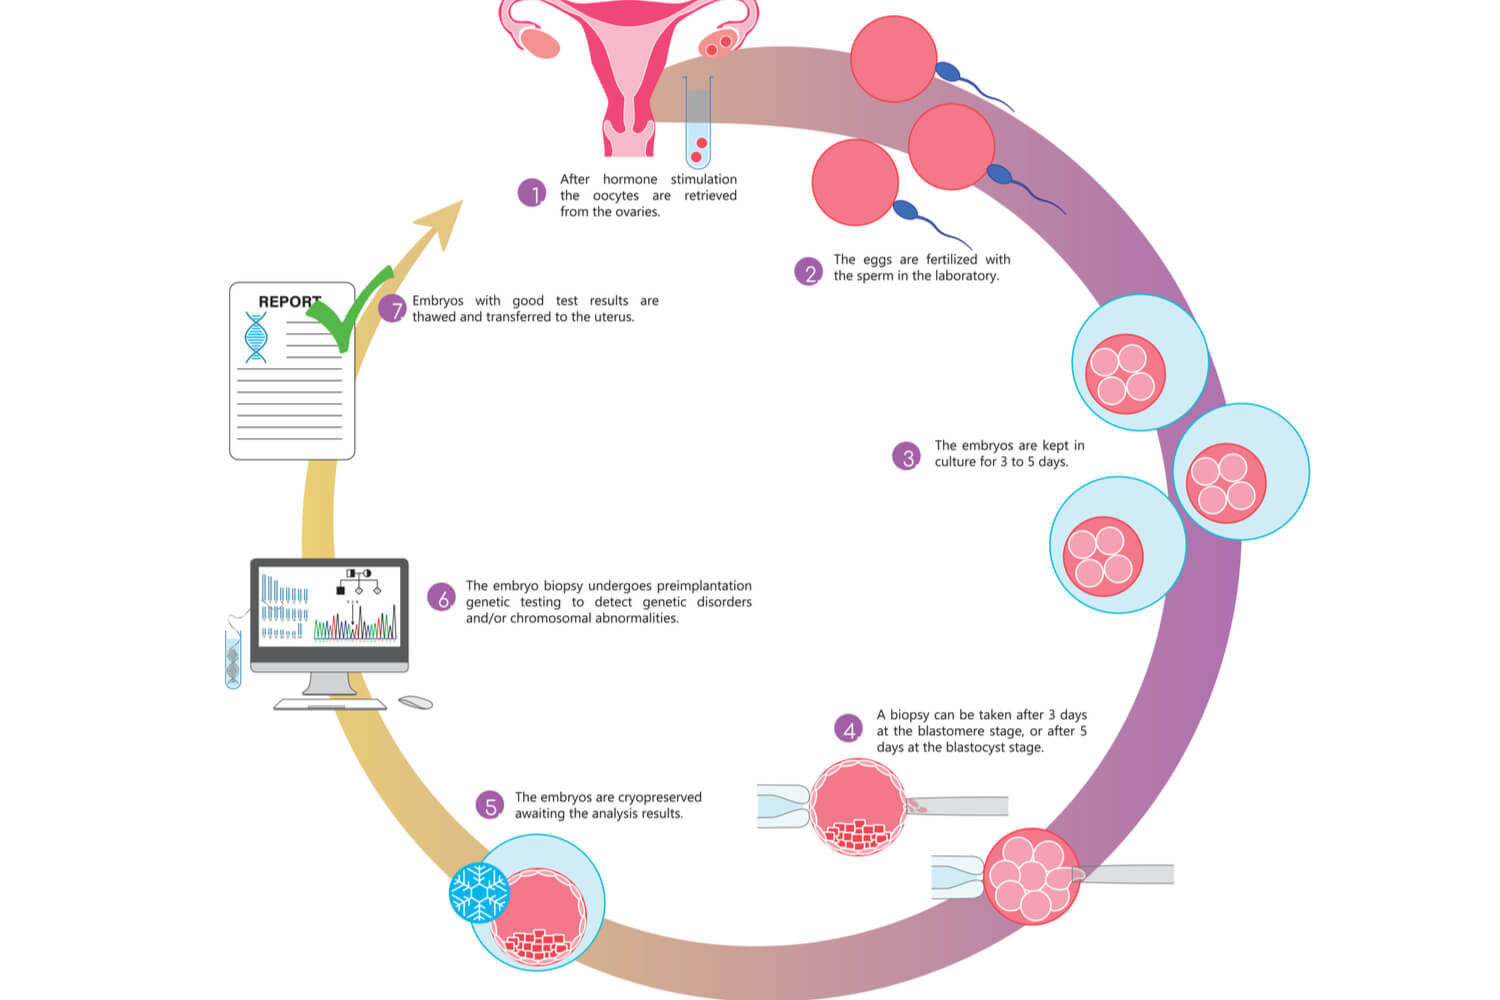  IVF cycle with preimplantation genetic testing